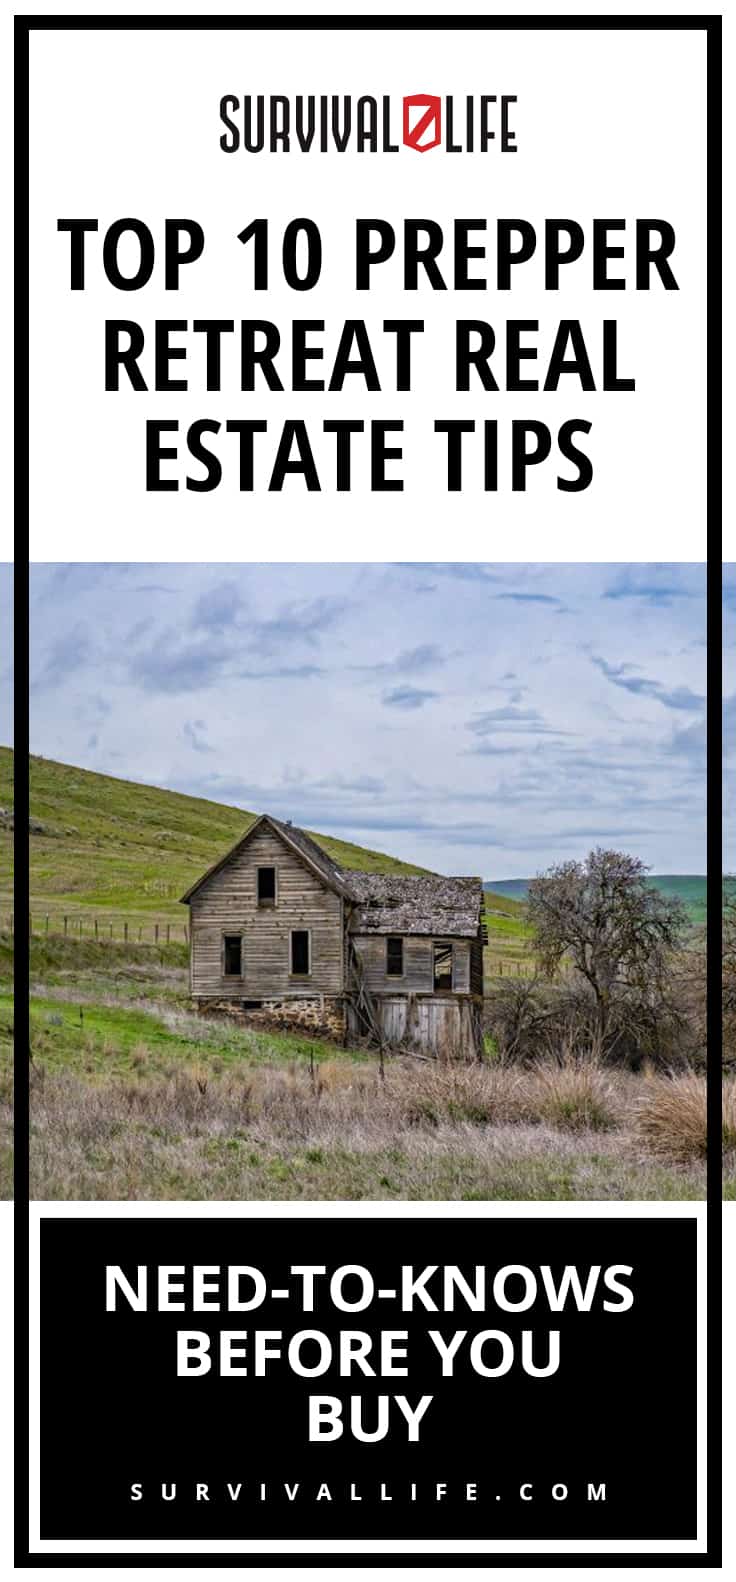 Top 10 Prepper Retreat Real Estate Tips | Need-To-Knows Before You Buy